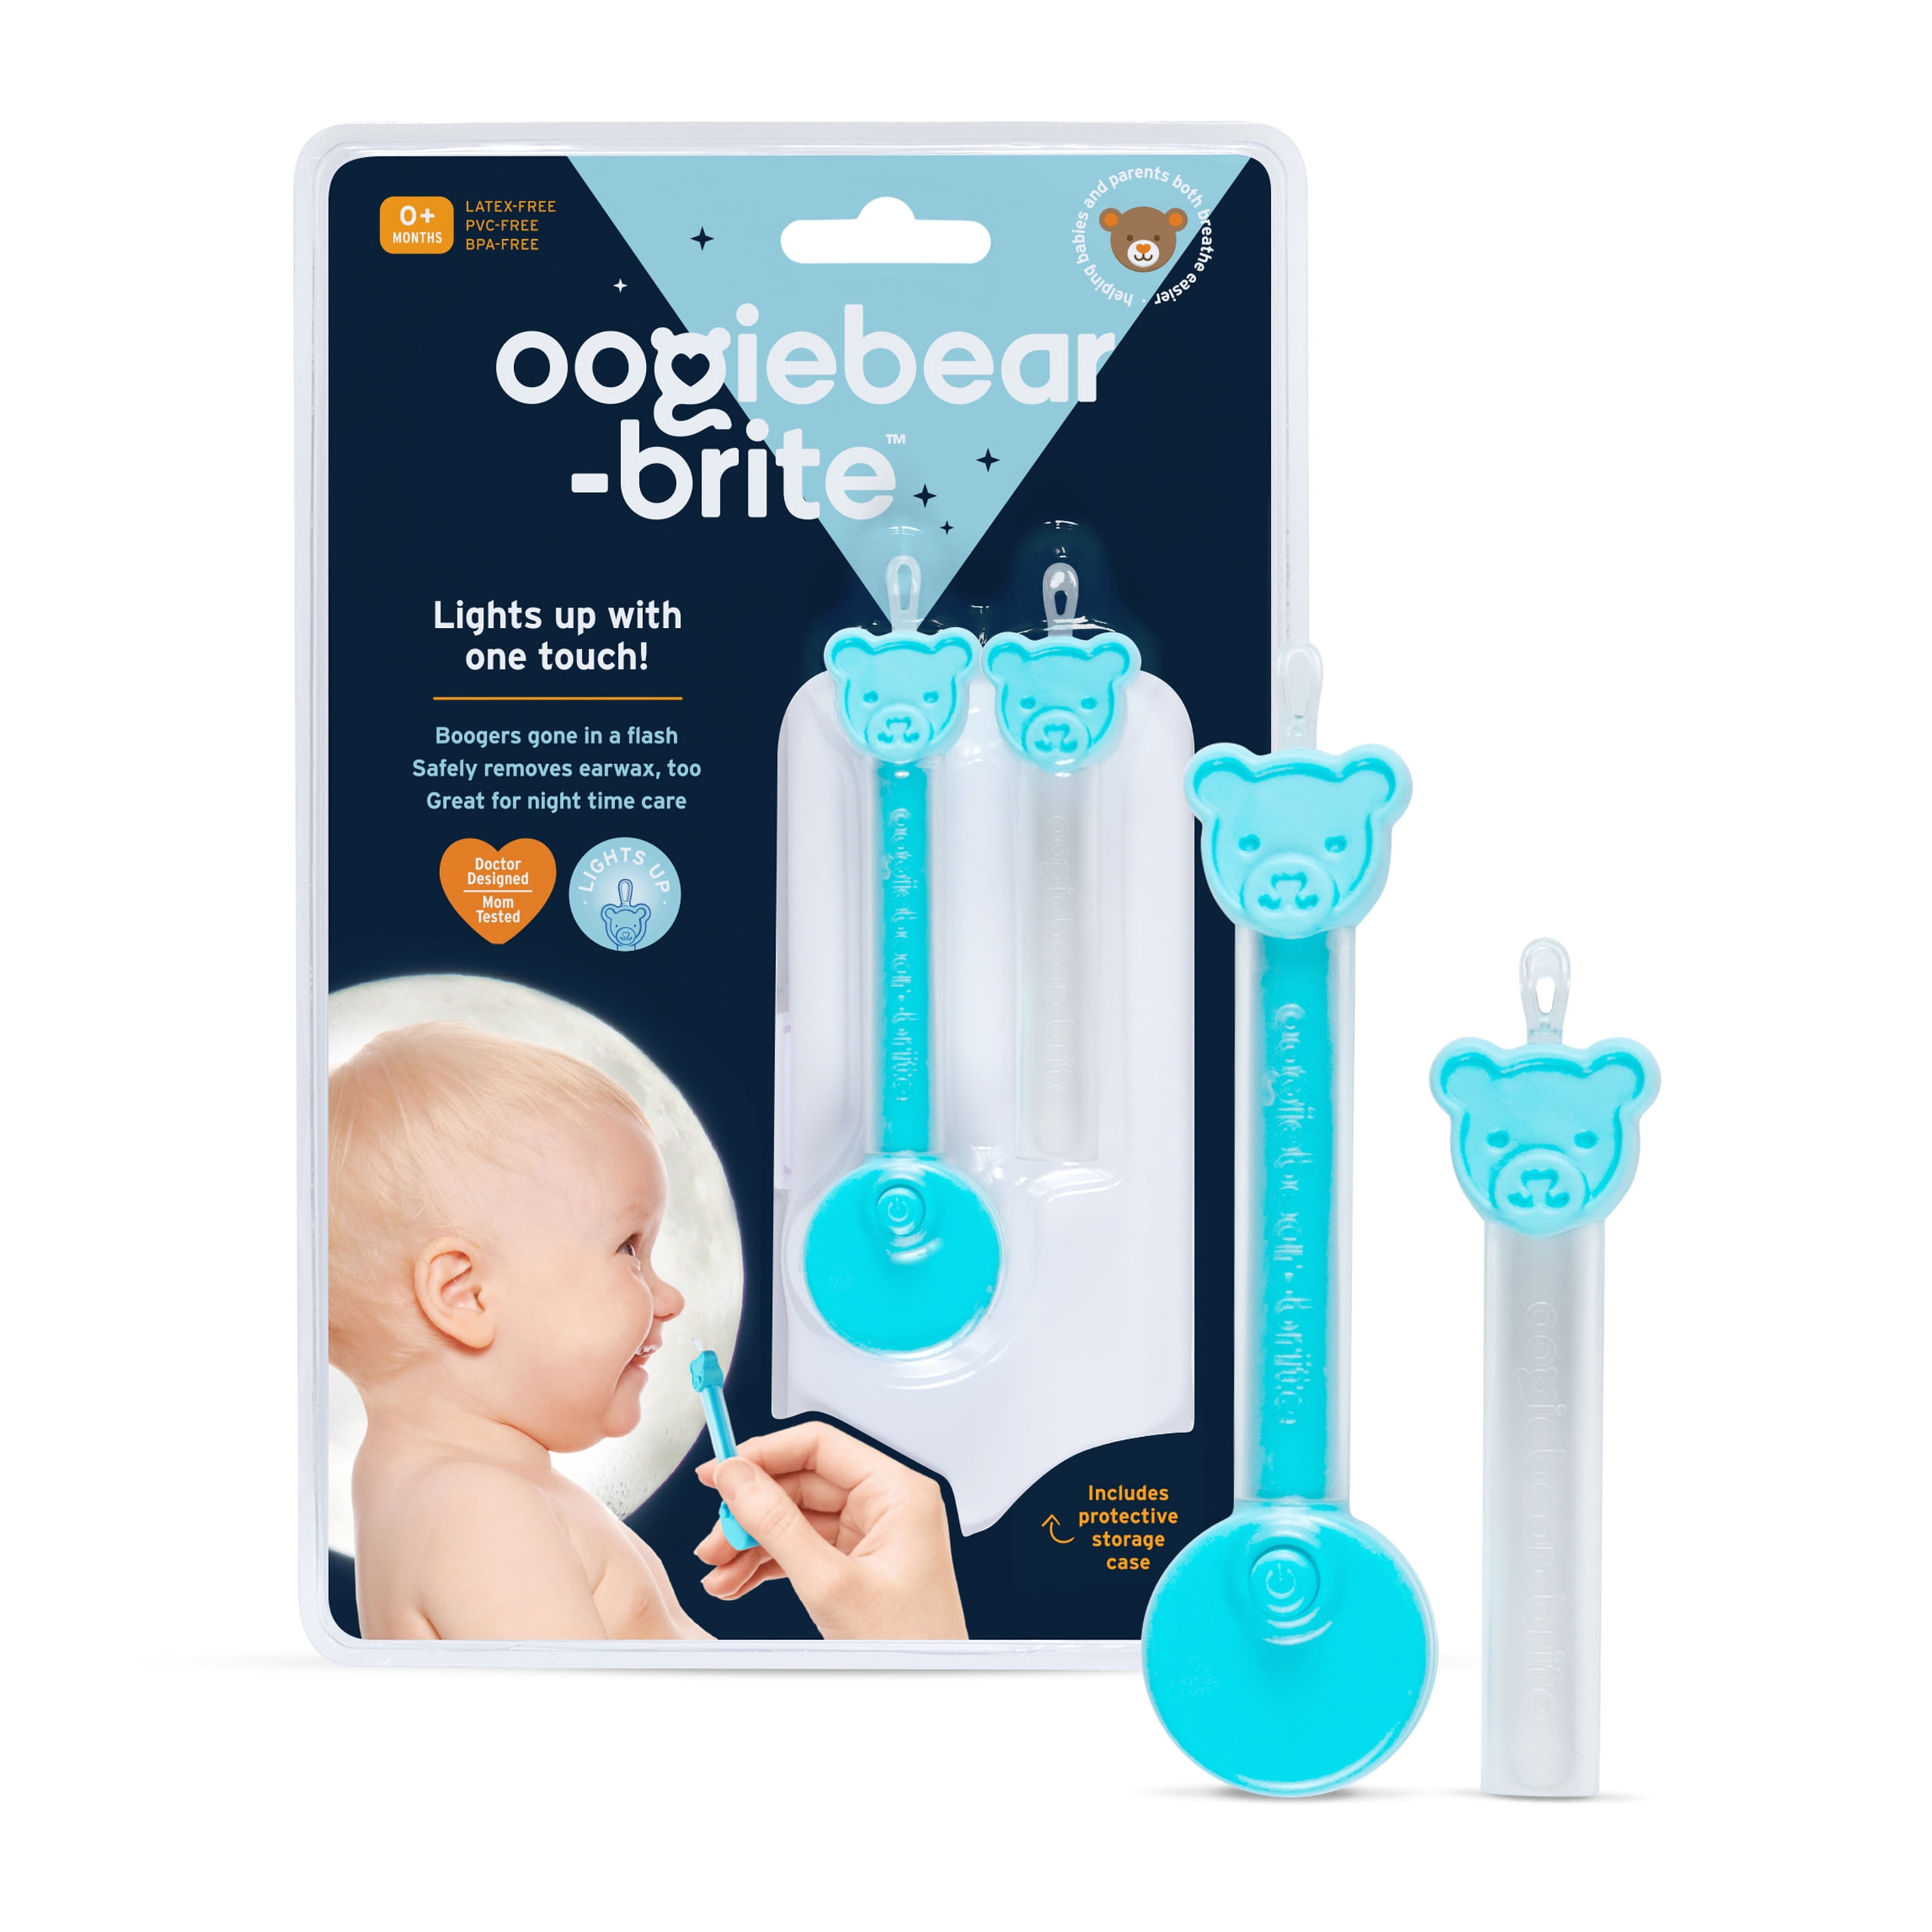 oogiebear Brite - Baby Nose and Ear Tool with LED Light. Aspirator Alternative.